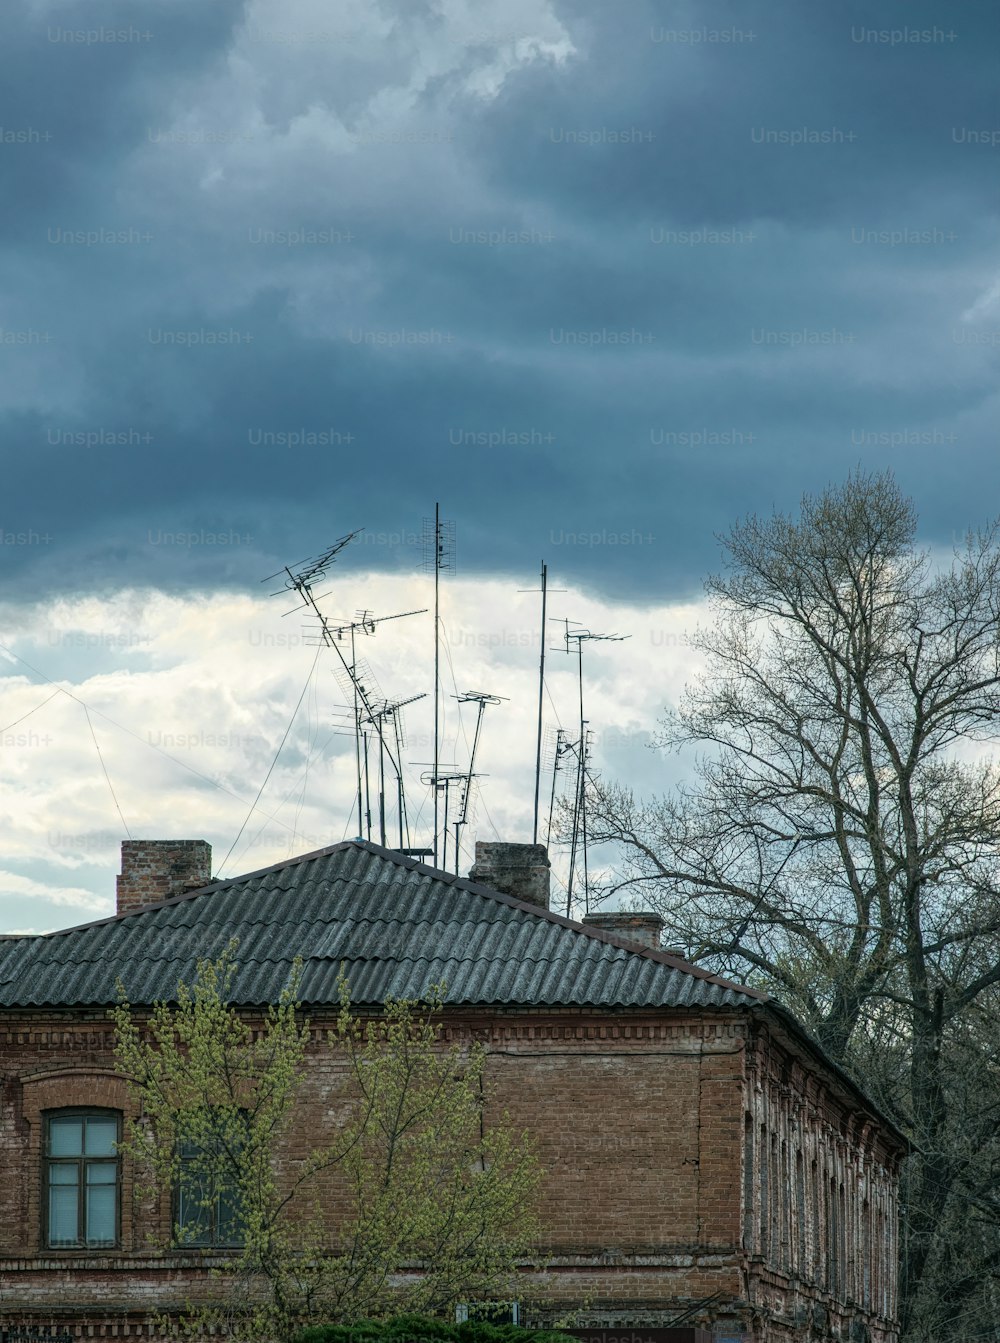 Outdated analog technology and old decrepit architecture. Slate roof and old rusty TV antennas against the backdrop of gray clouds of stormy sky